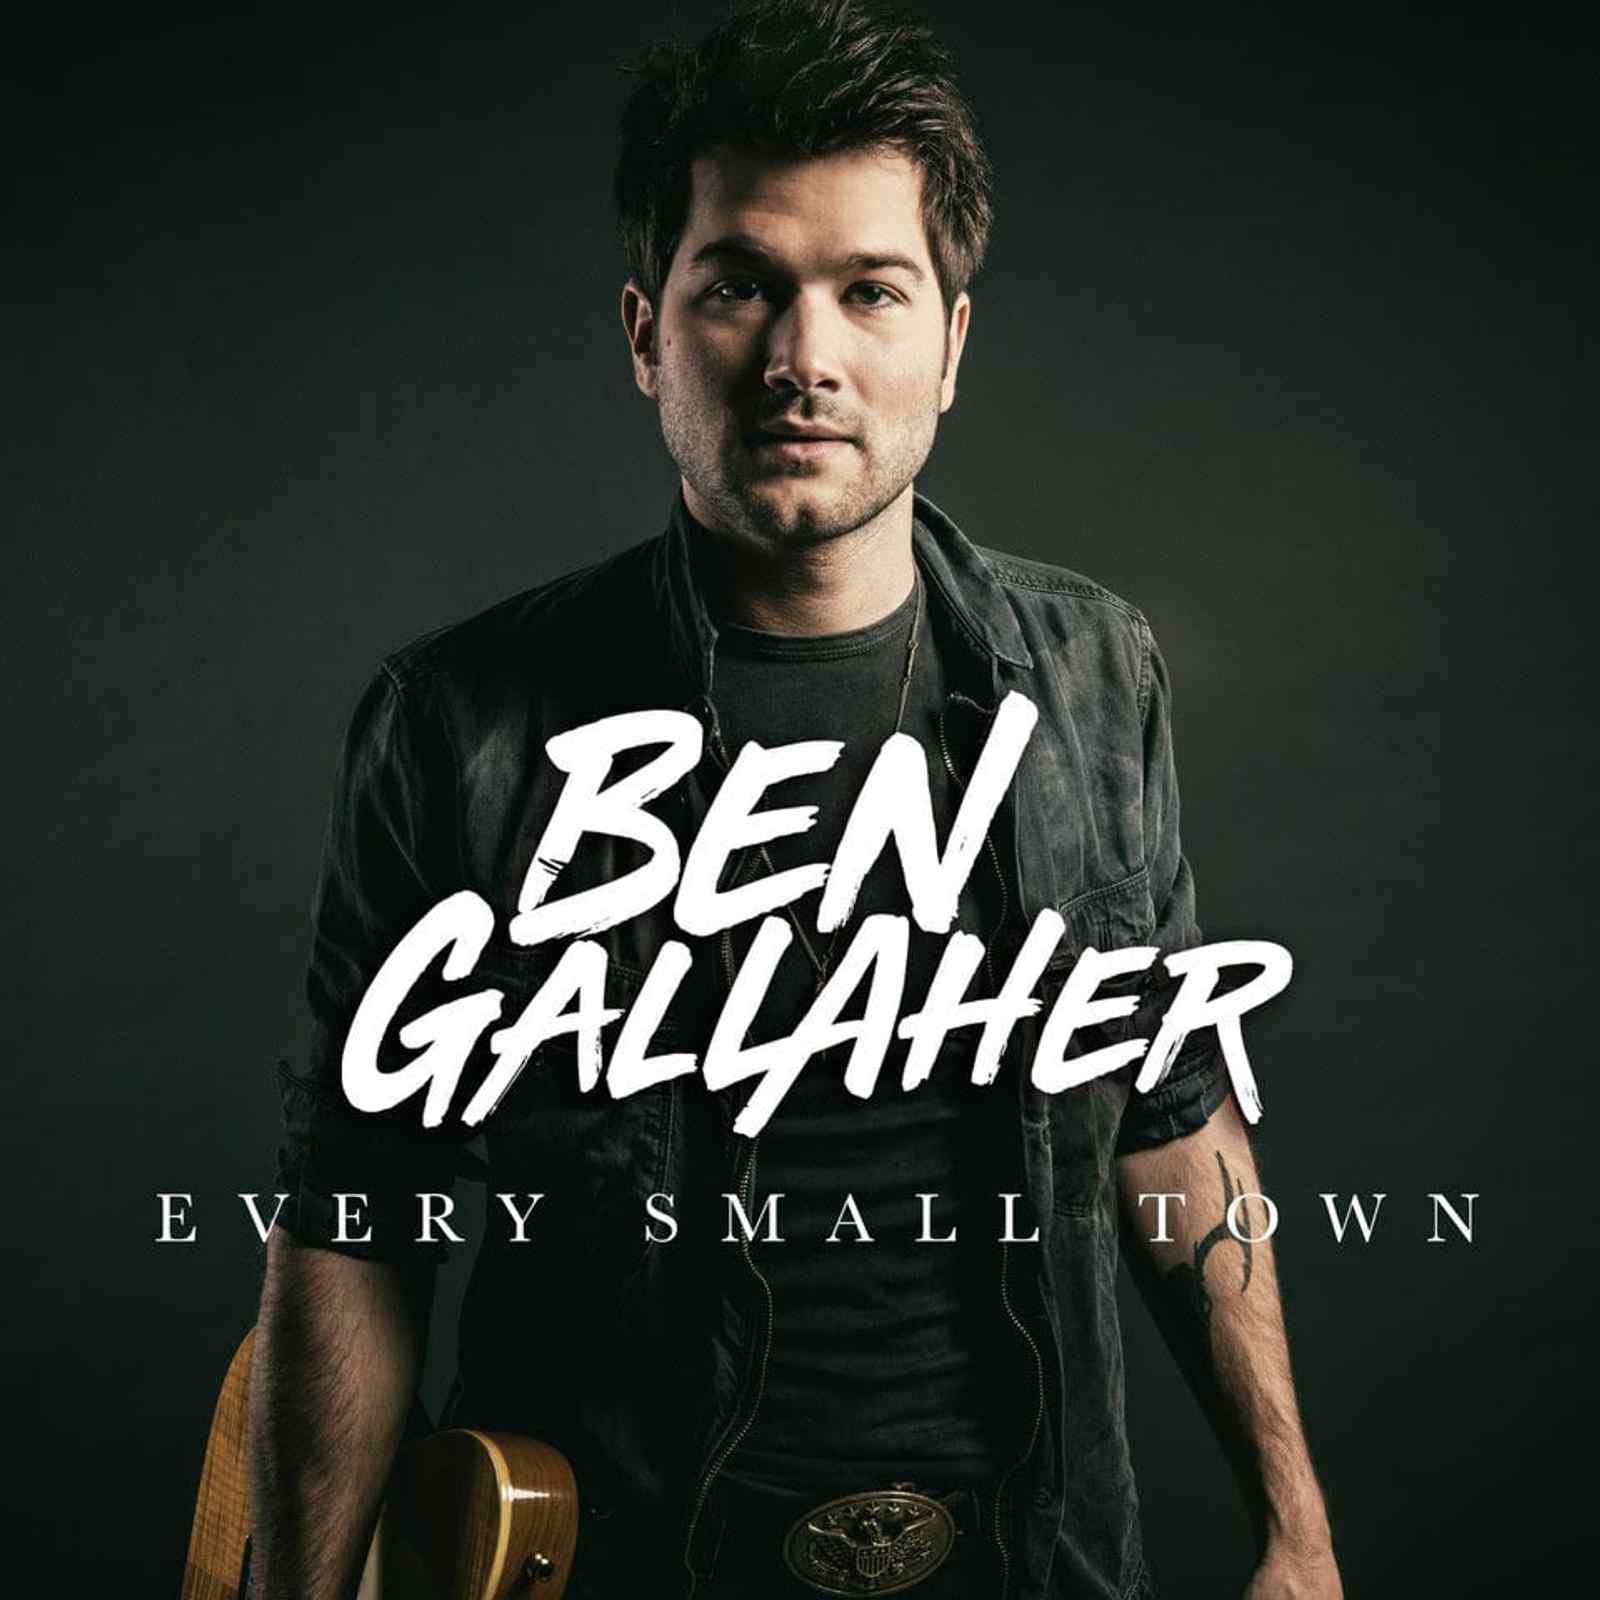 "Every Small Town" EP by Ben Gallher